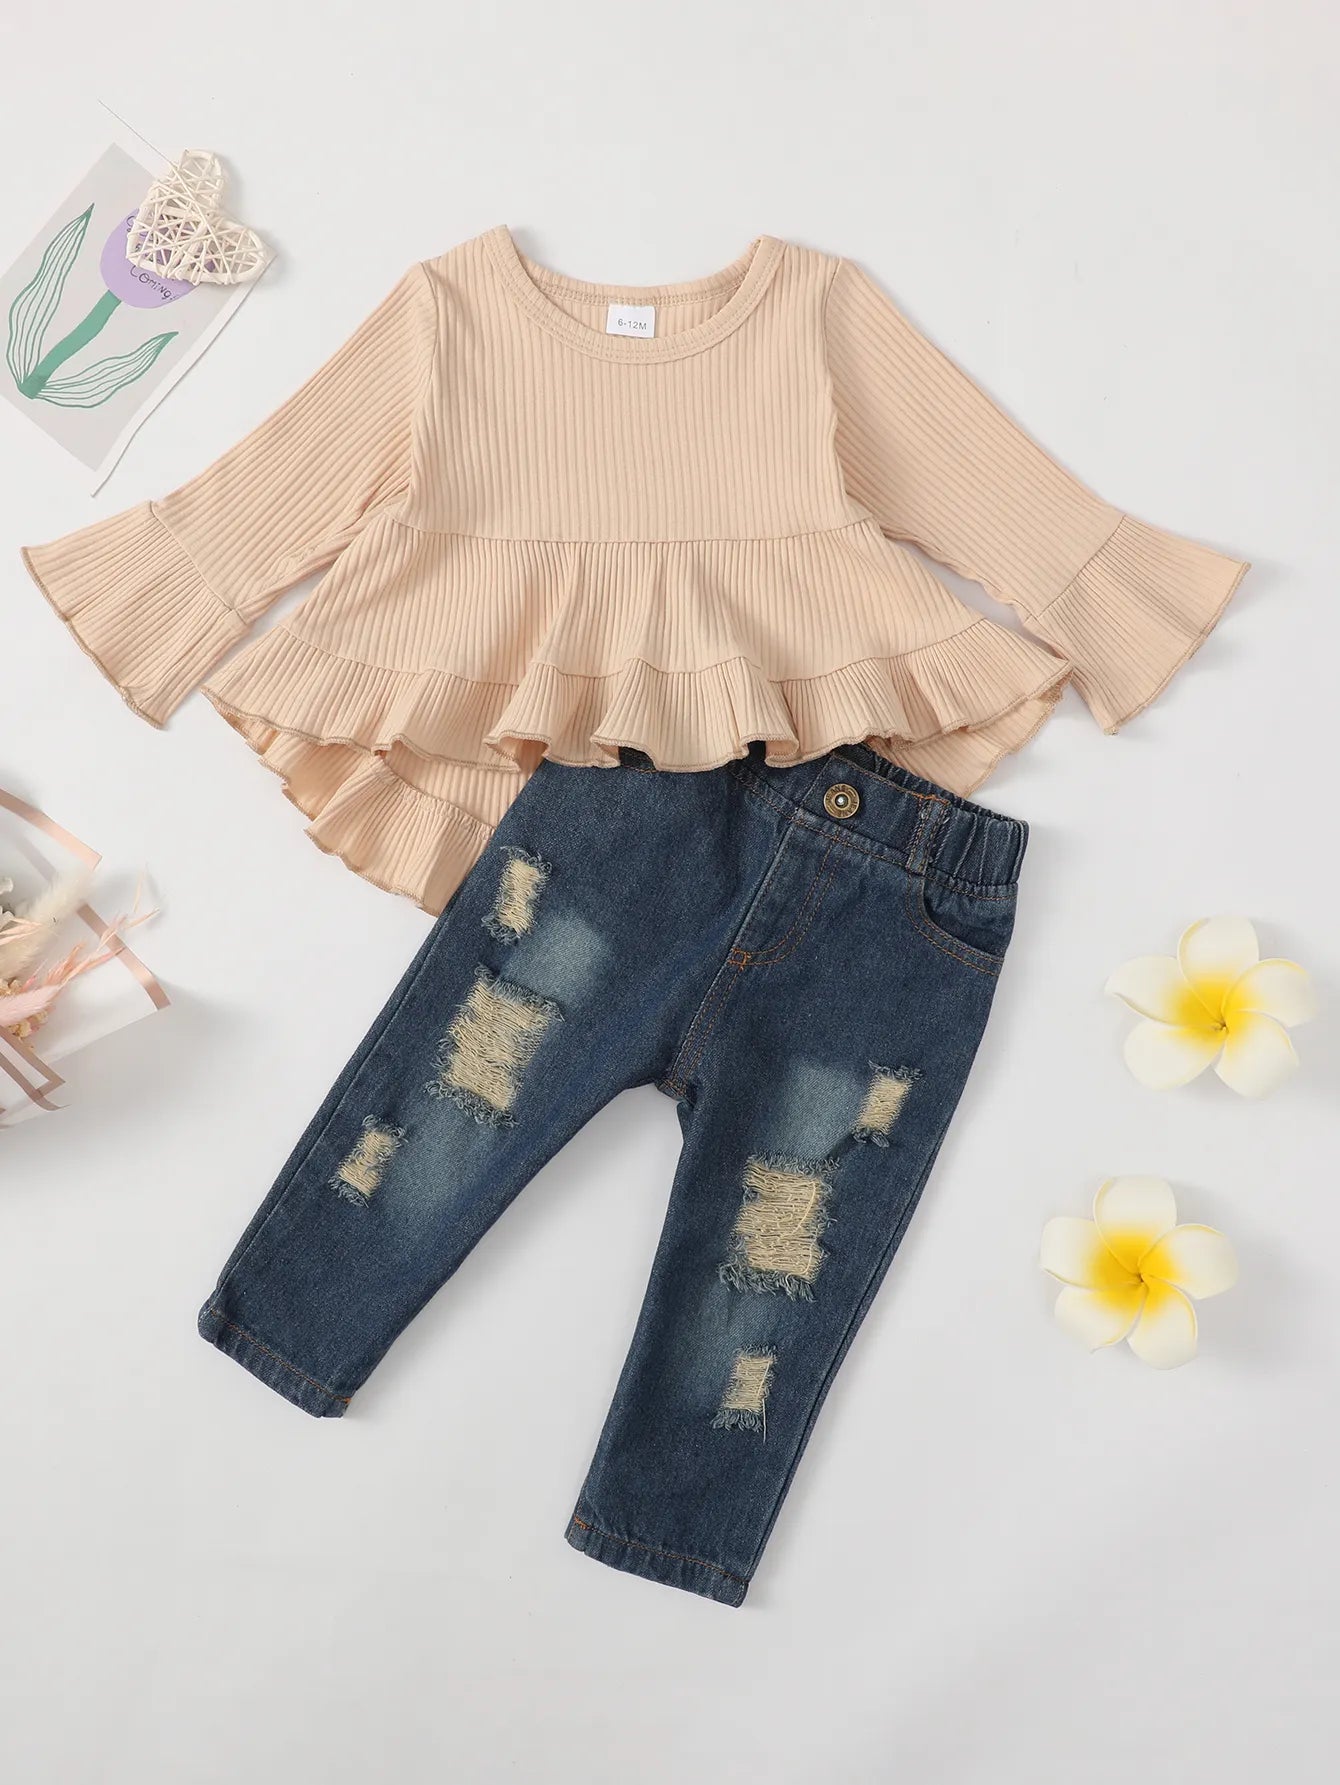 Baby Girl's 2pcs Ribbed Long Sleeve Top & Ripped Denim Jeans Set Ruffle Decor Casual Outfits Toddler Kids Clothes For Spring